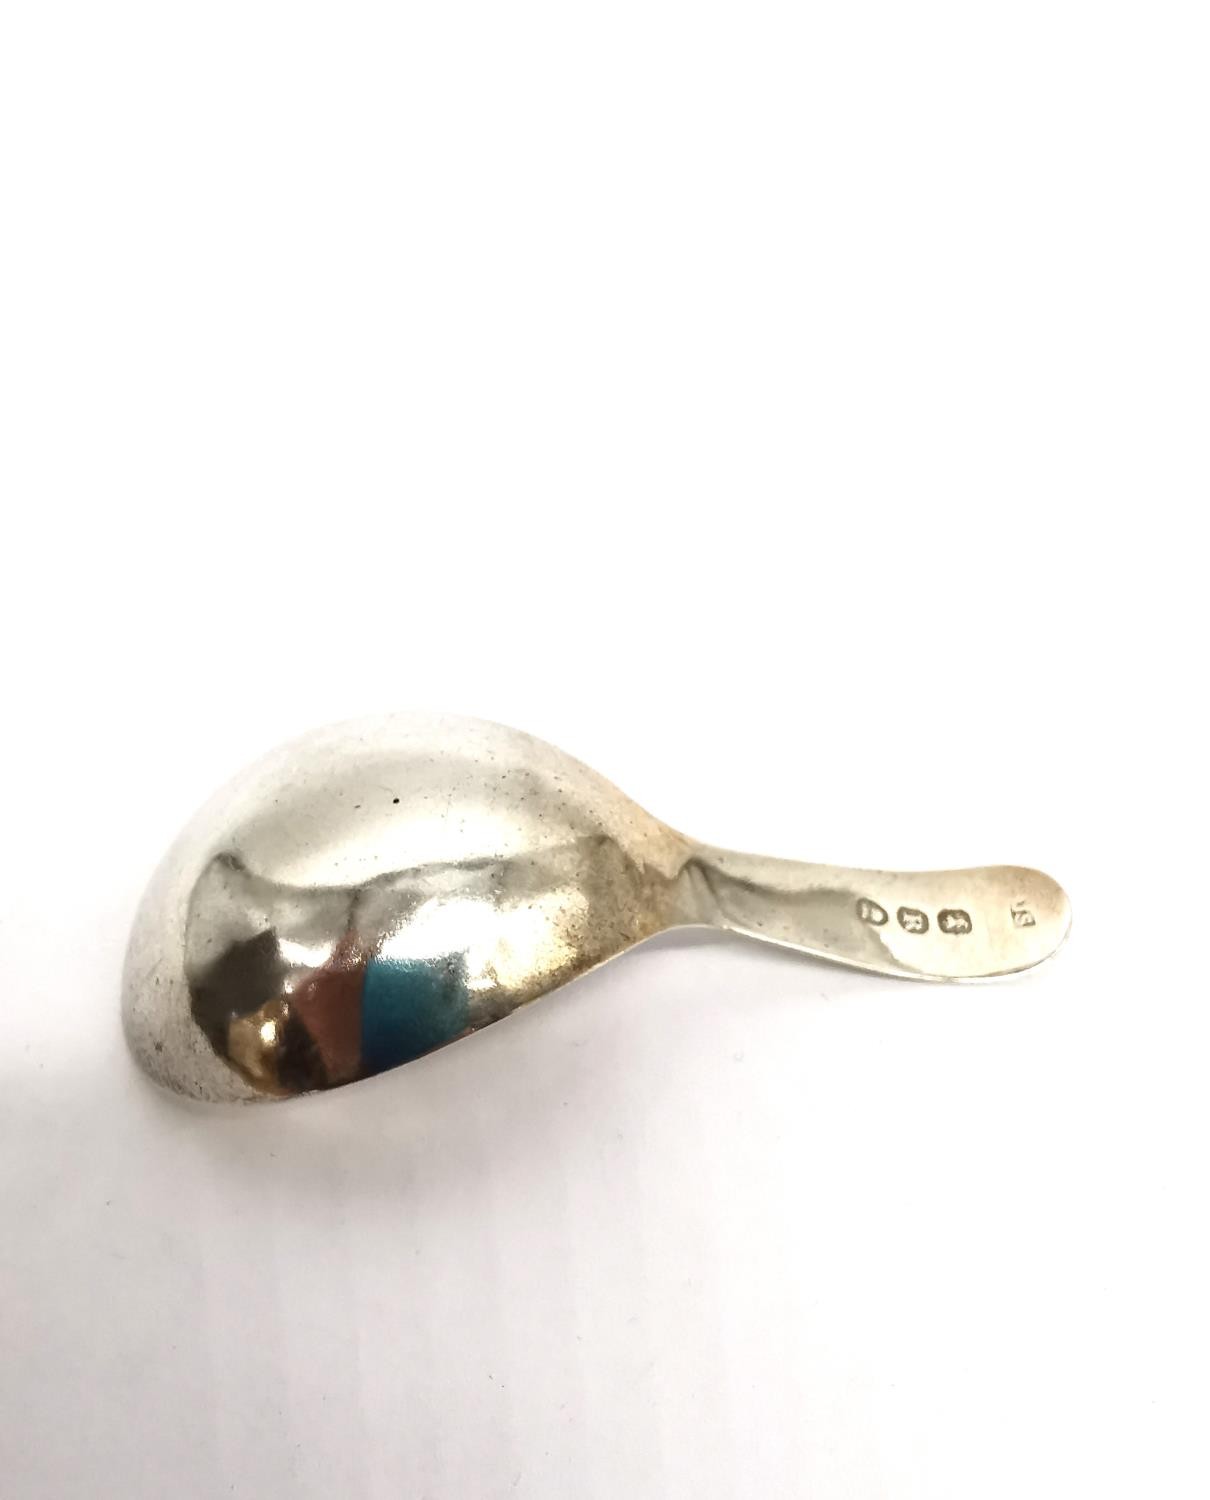 Georg Jensen, Danish, an early 20th Century Danish sterling silver Cactus pattern caddy spoon, - Image 8 of 9